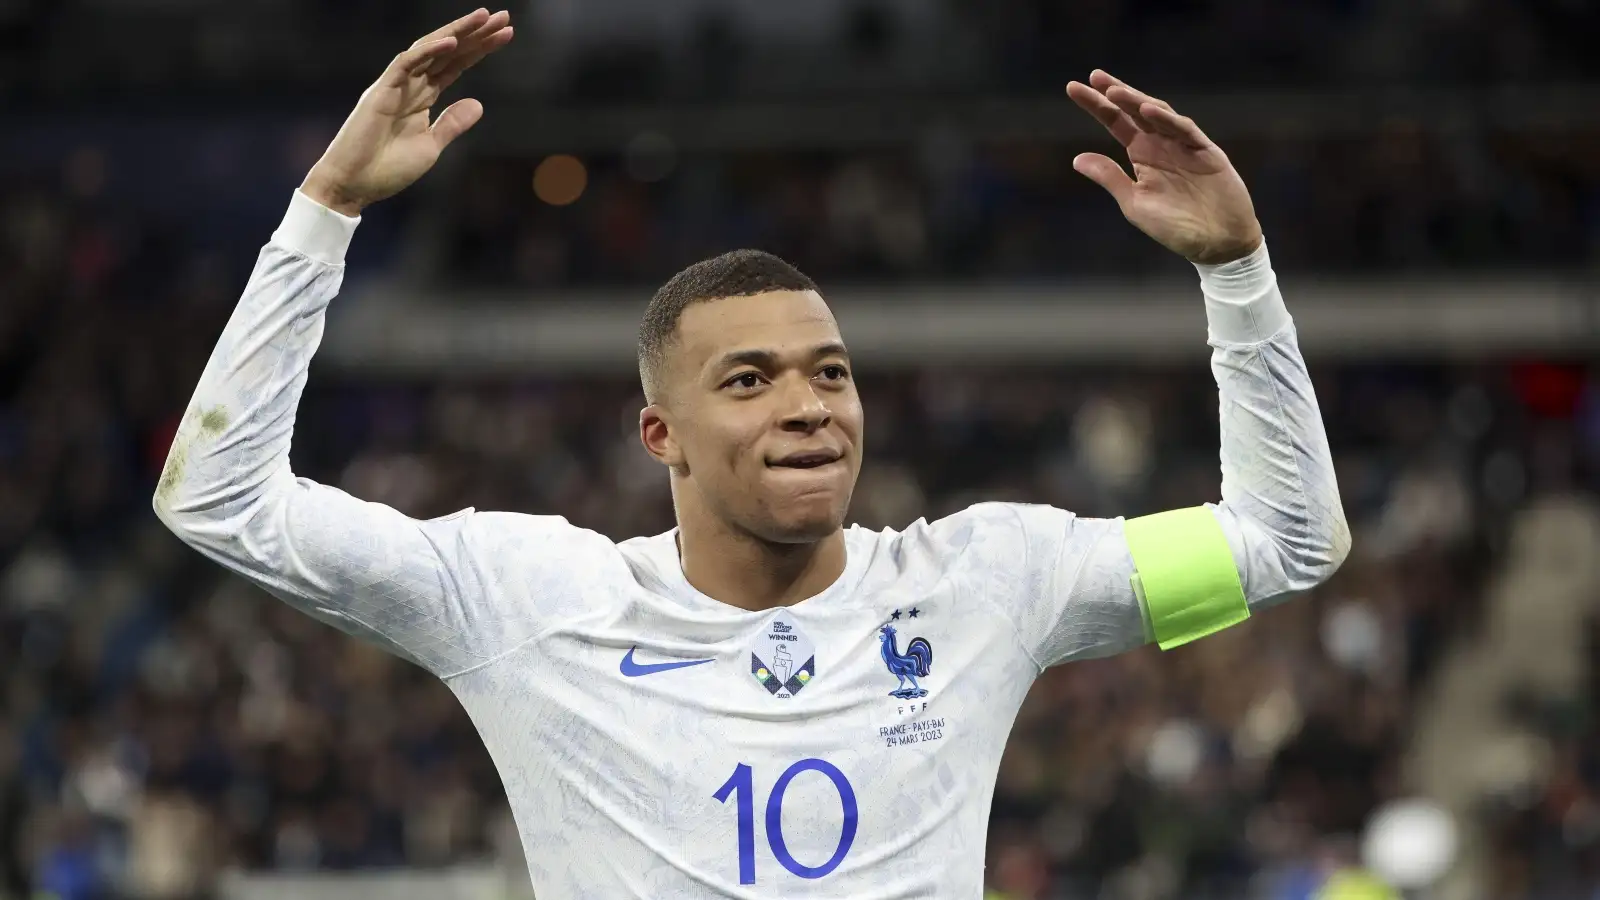 Kylian Mbappe’s latest masterclass proves it: we’re looking at a future GOAT